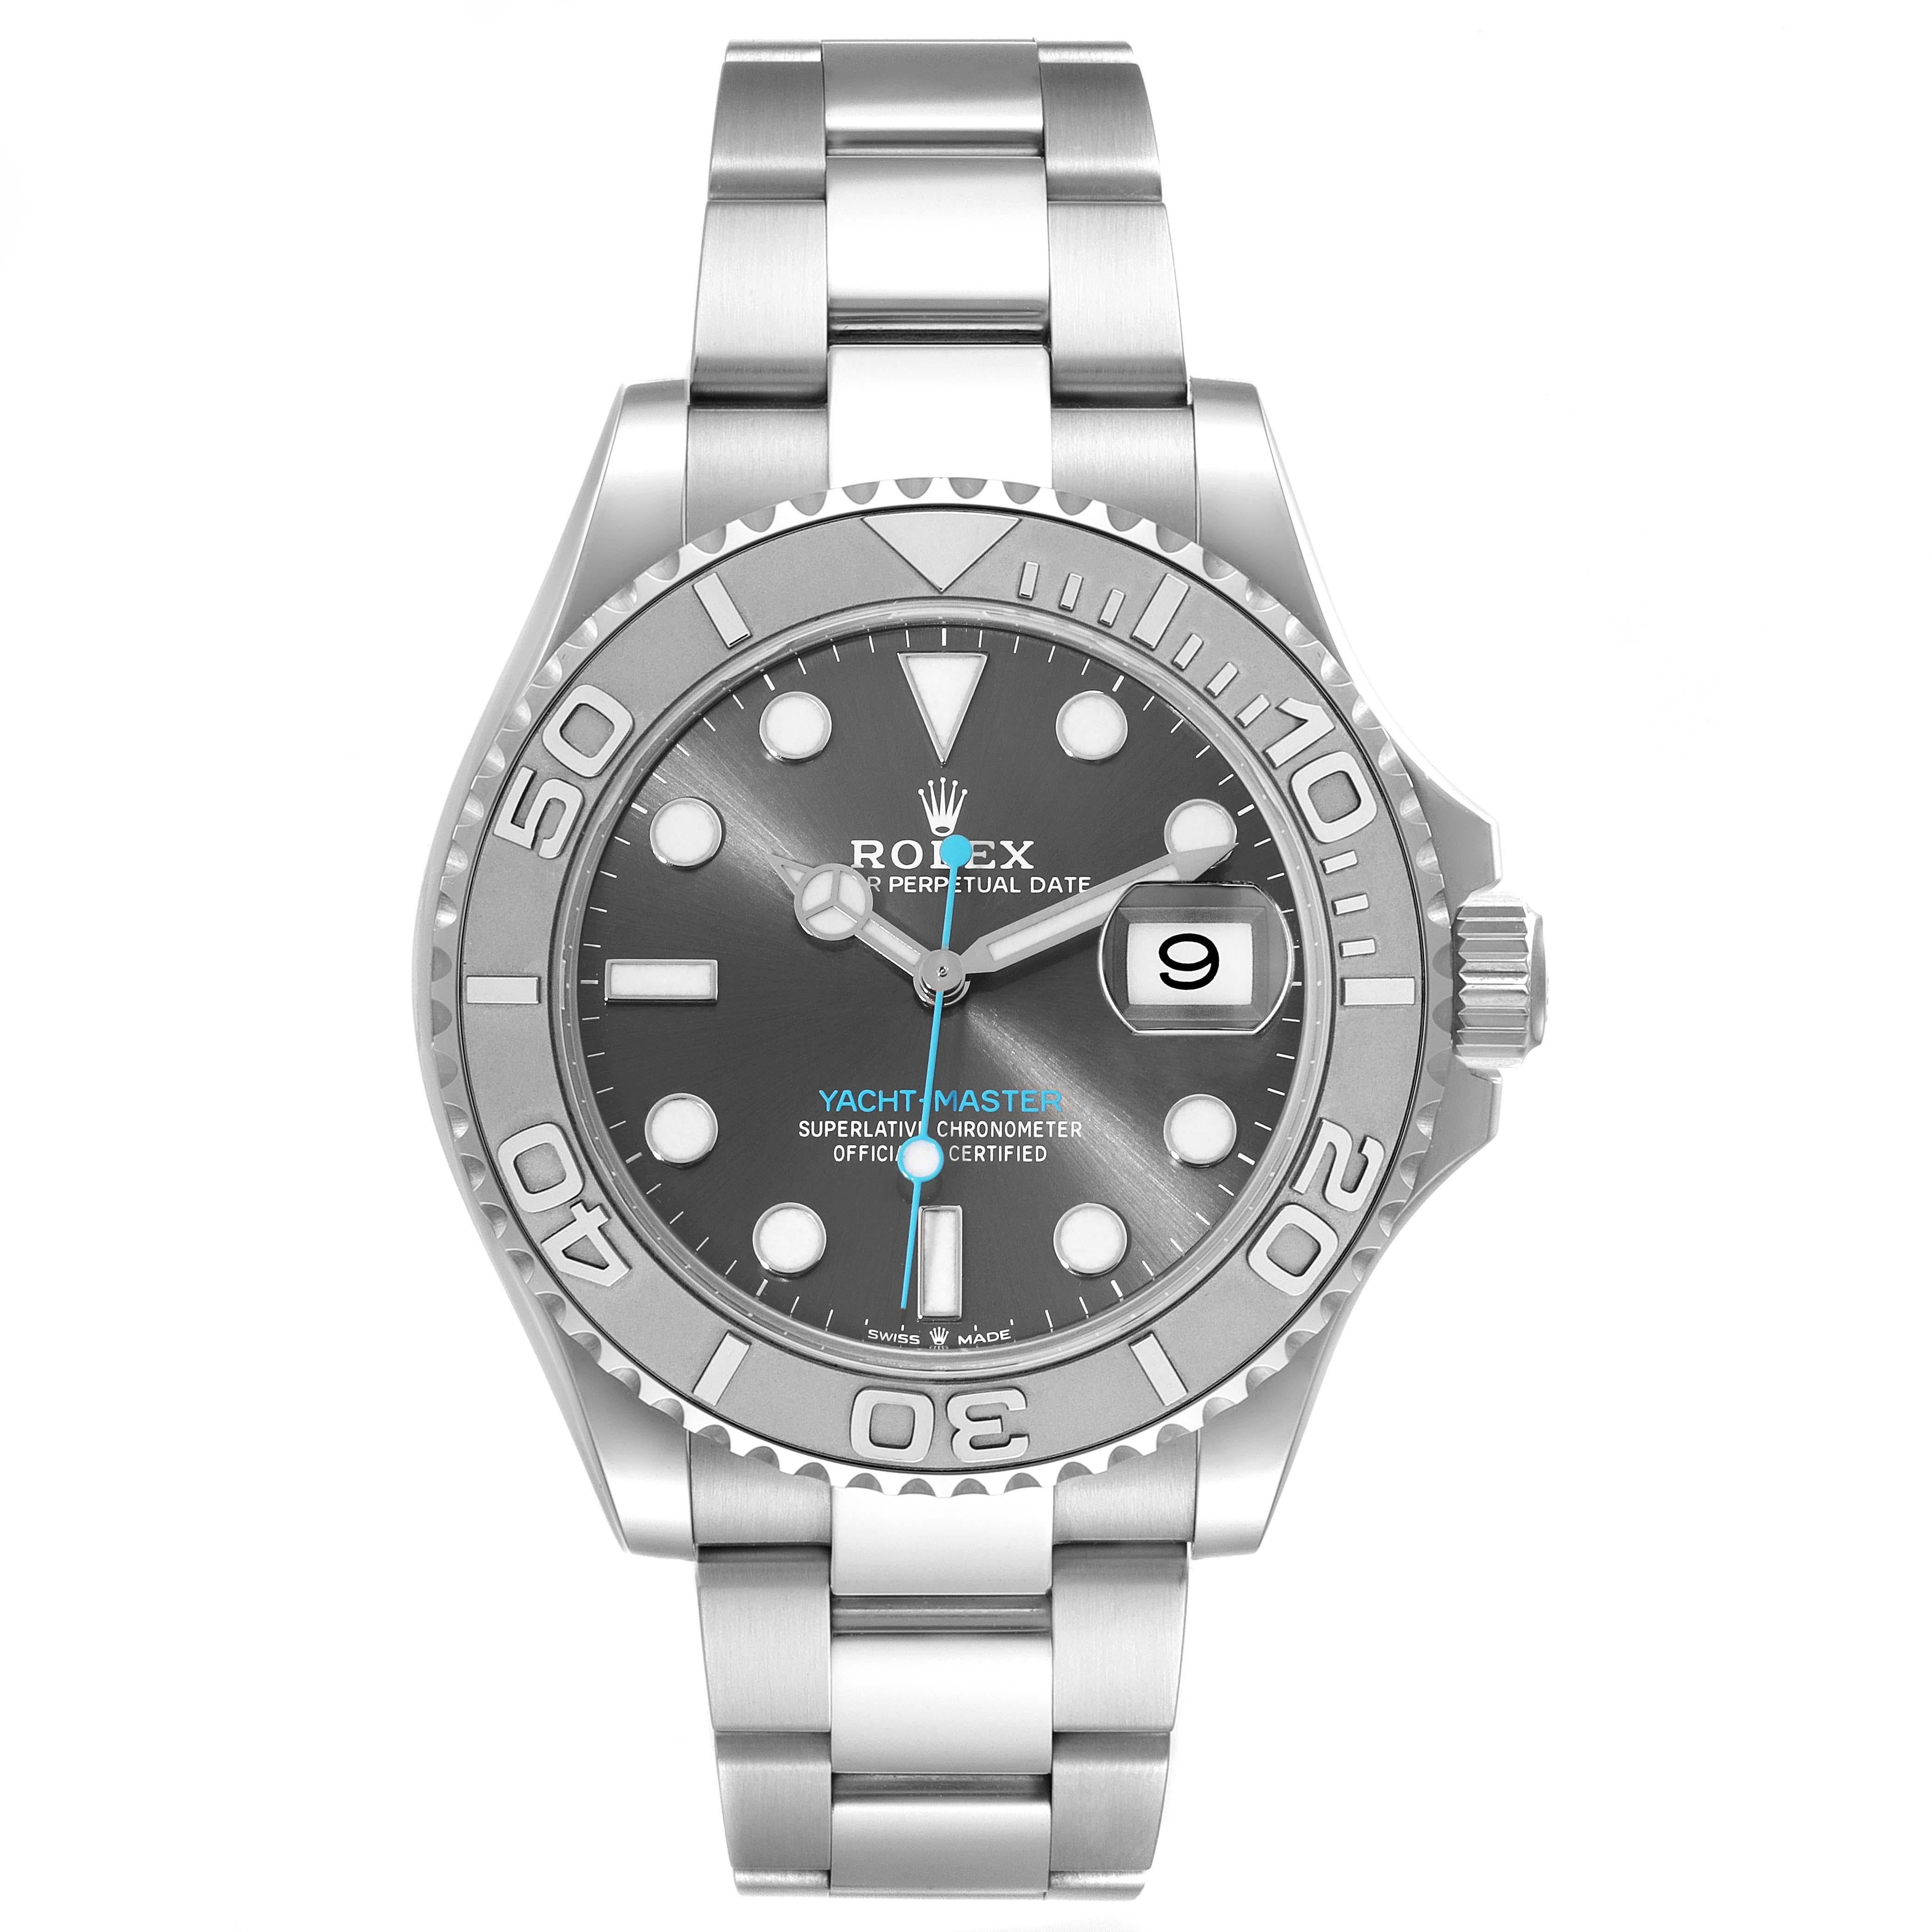 Rolex Yachtmaster Steel Platinum Bezel Rhodium Dial Mens Watch 126622 Box Card. Officially certified chronometer automatic self-winding movement. Stainless steel case 40.0 mm in diameter. Rolex logo on the crown. Platinum special time-lapse